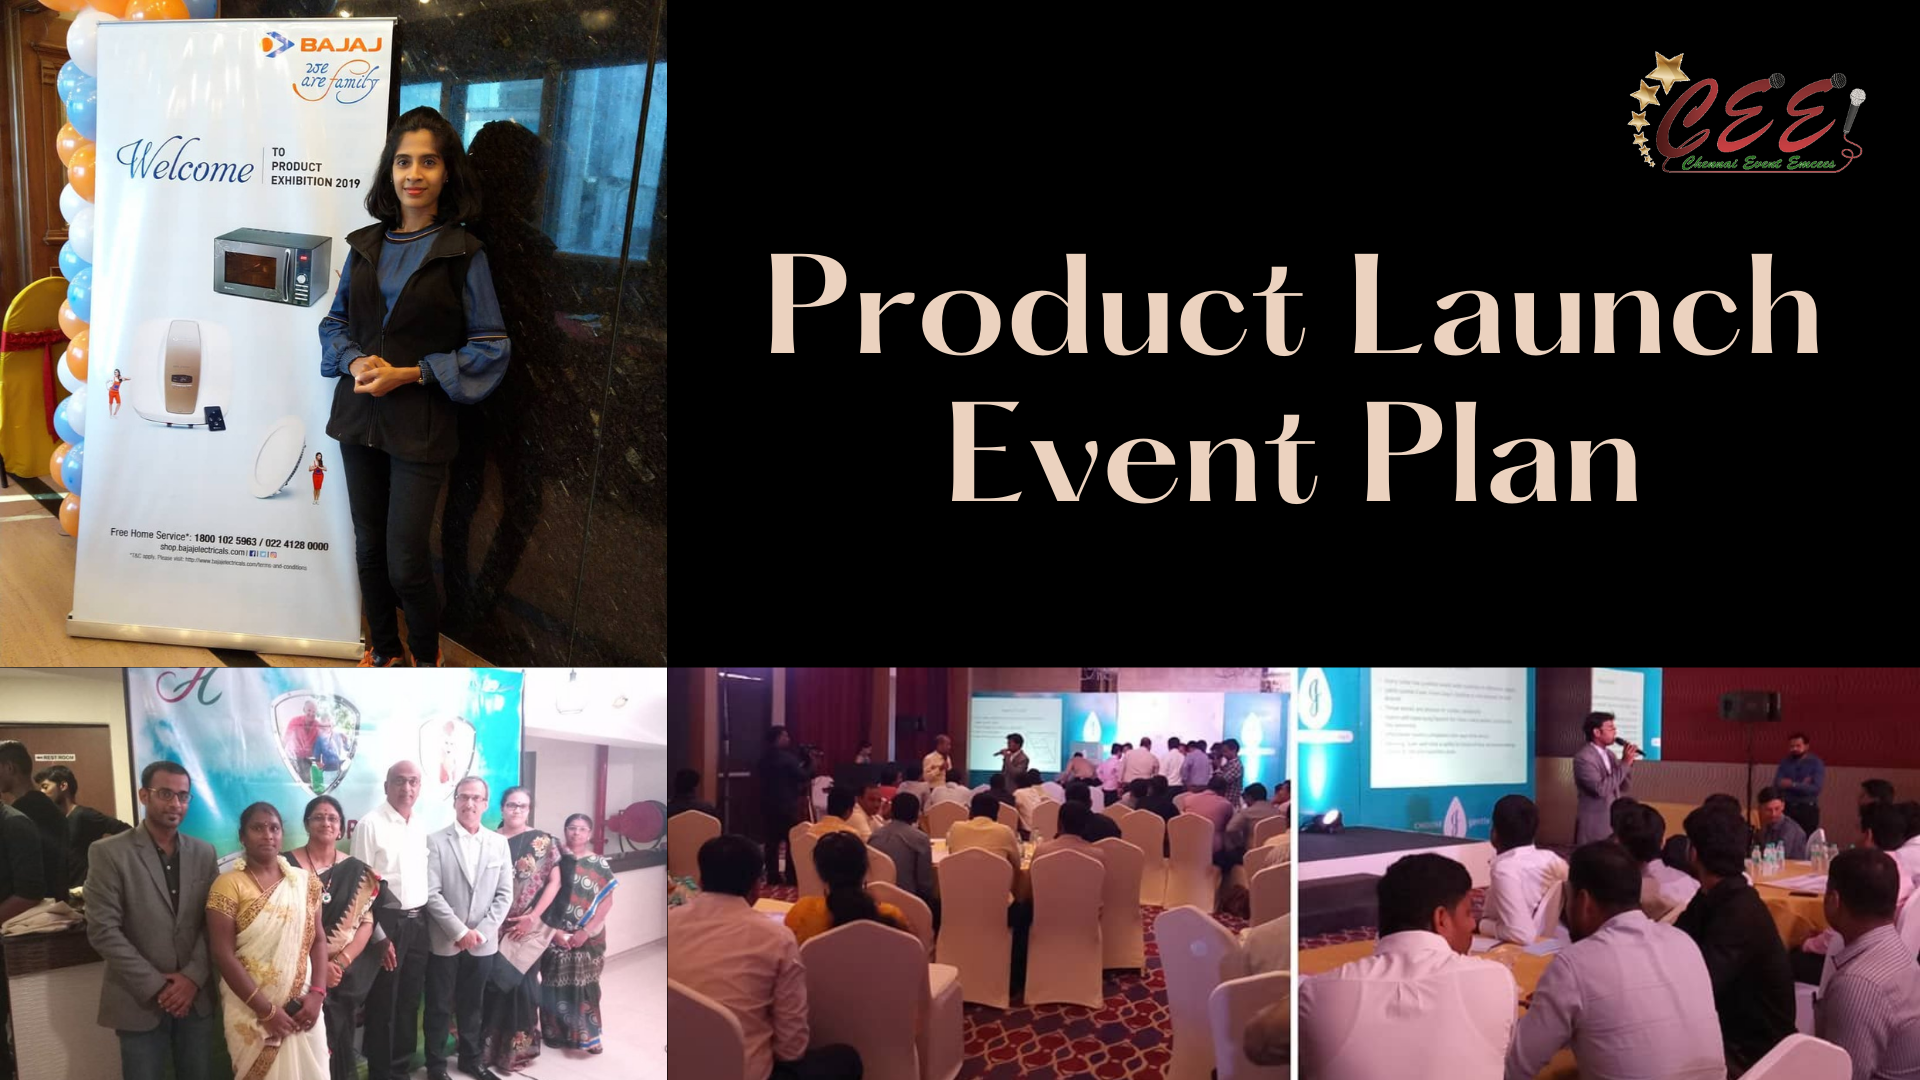 Event Plan for Product Launch Event by Chennai Male Emcee Thamizharasan Karunakaran